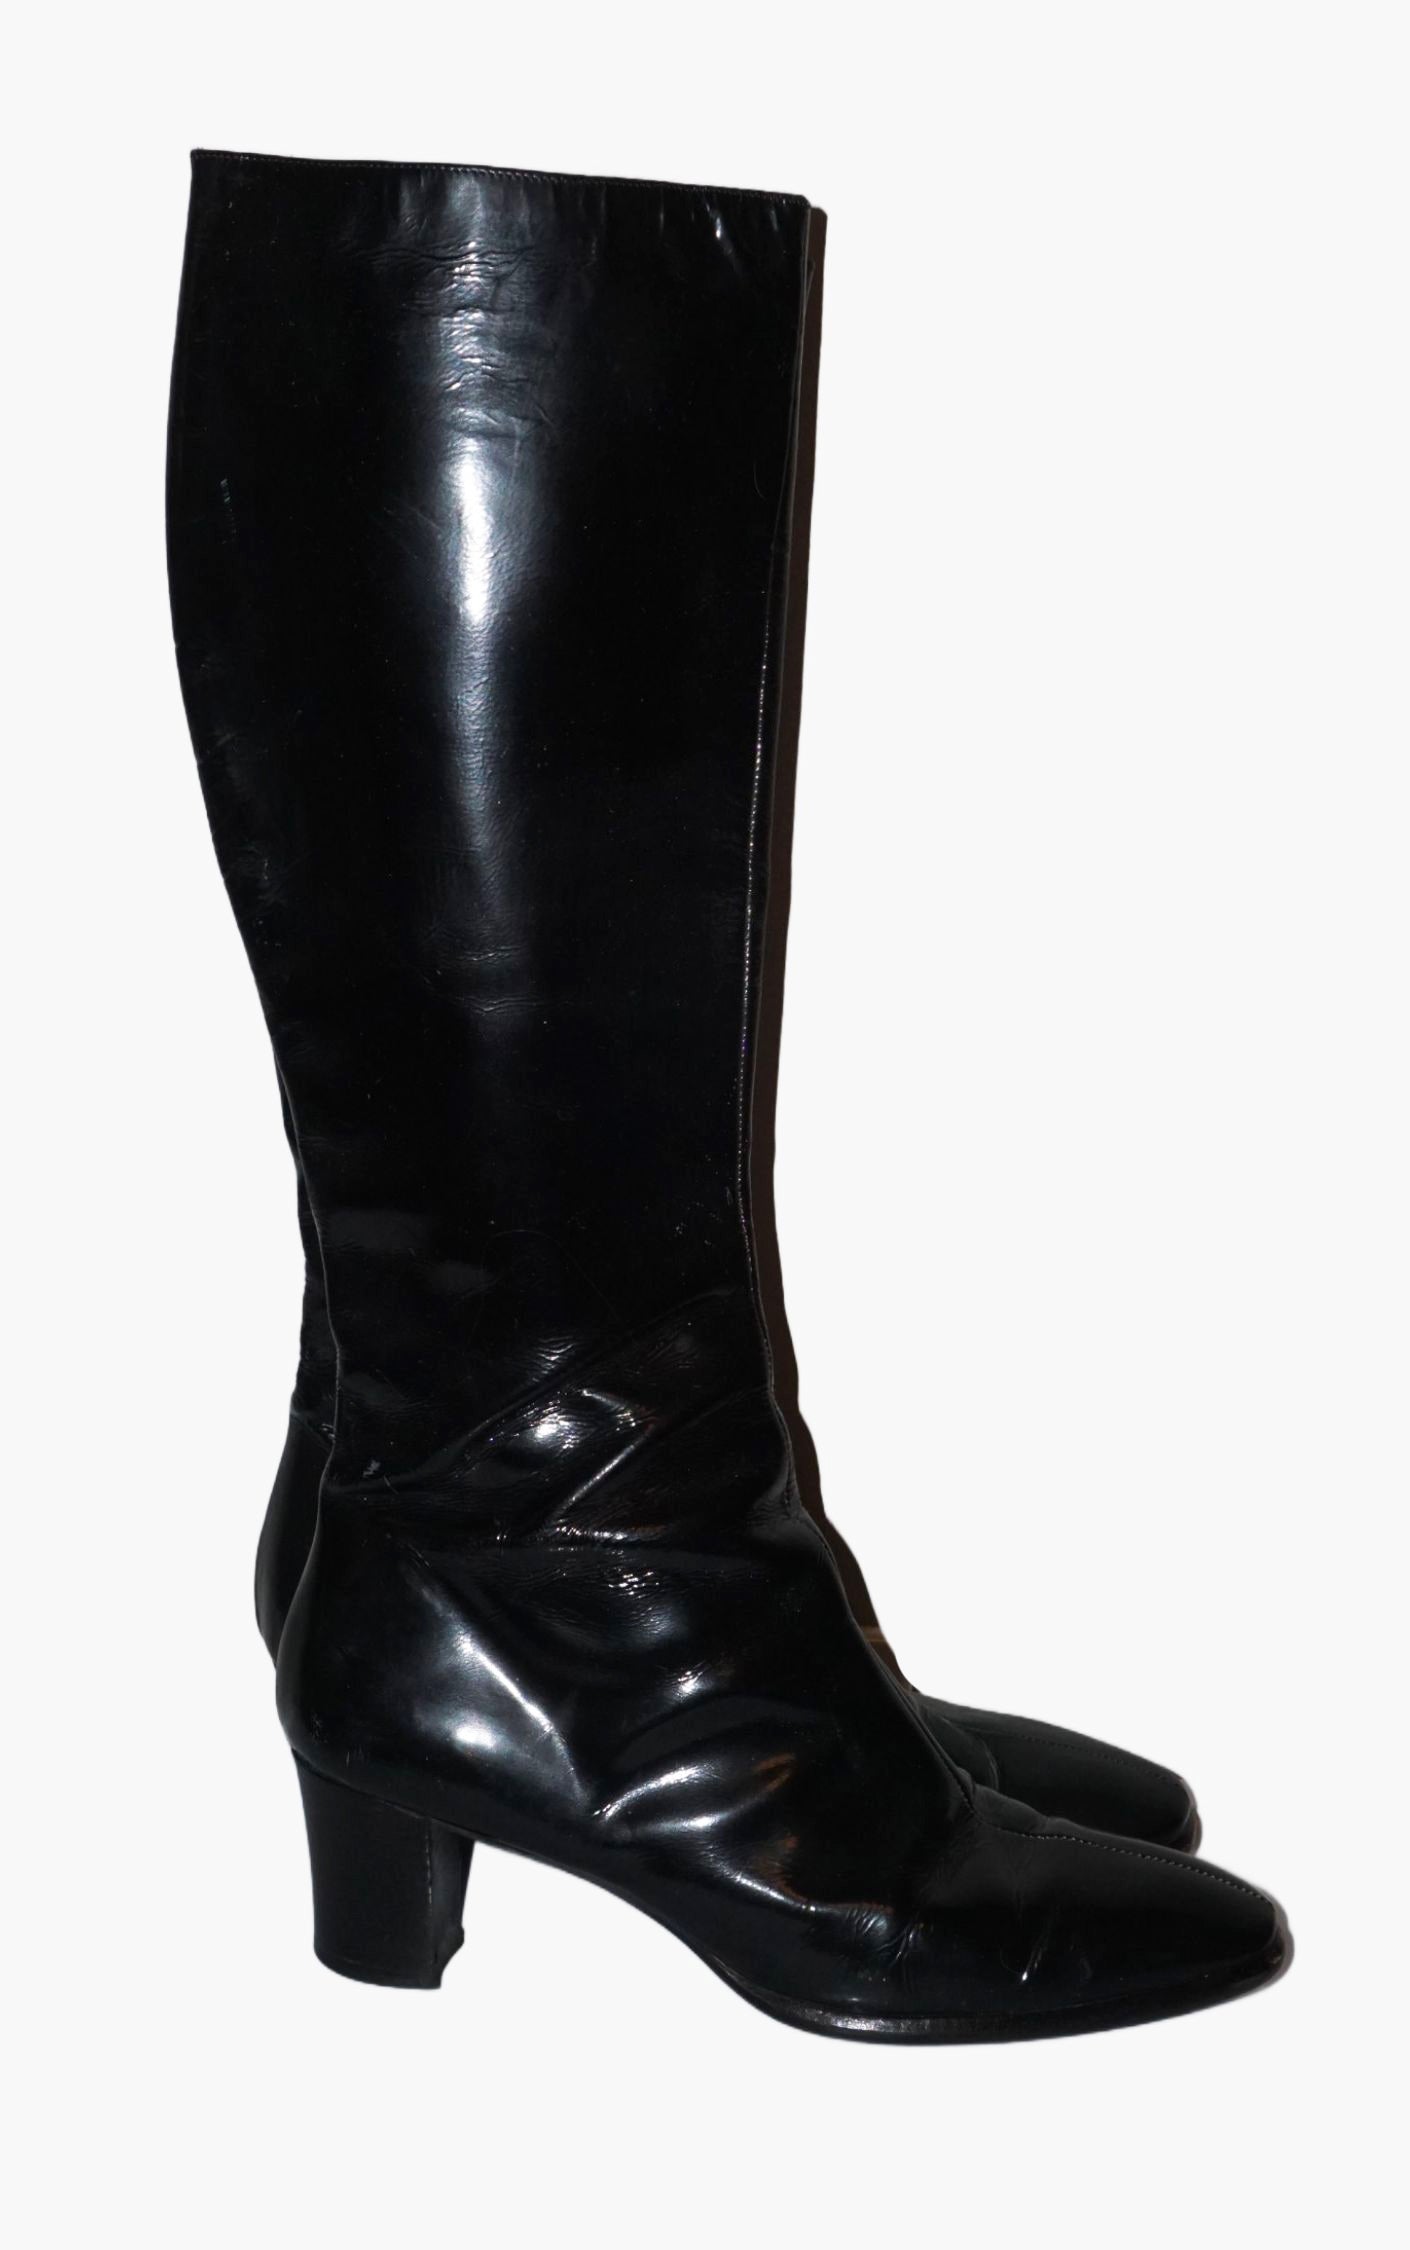 ANDREA CARRANO Black Patent Leather Knee Length Heeled Boots resellum